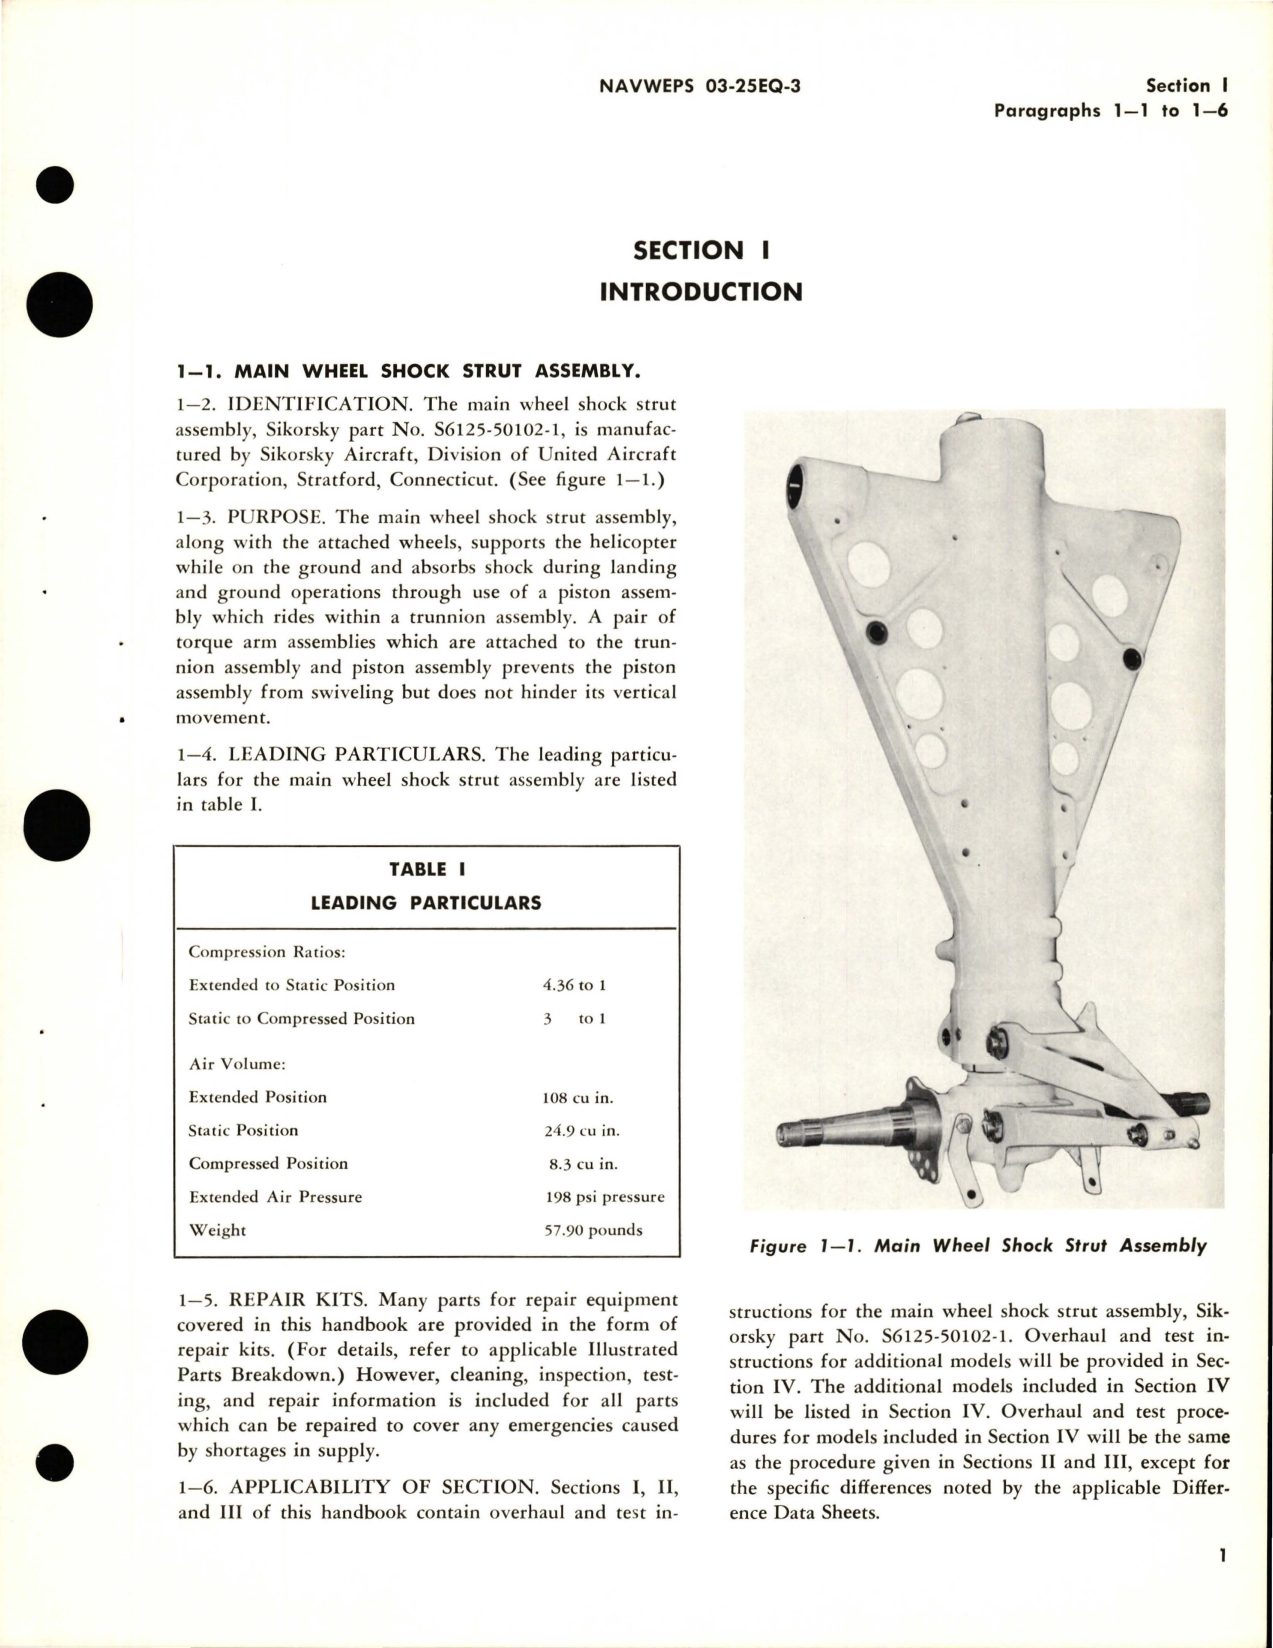 Sample page 5 from AirCorps Library document: Overhaul Instructions for Main Wheel Shock Strut Assembly - Part S6125-50102-1